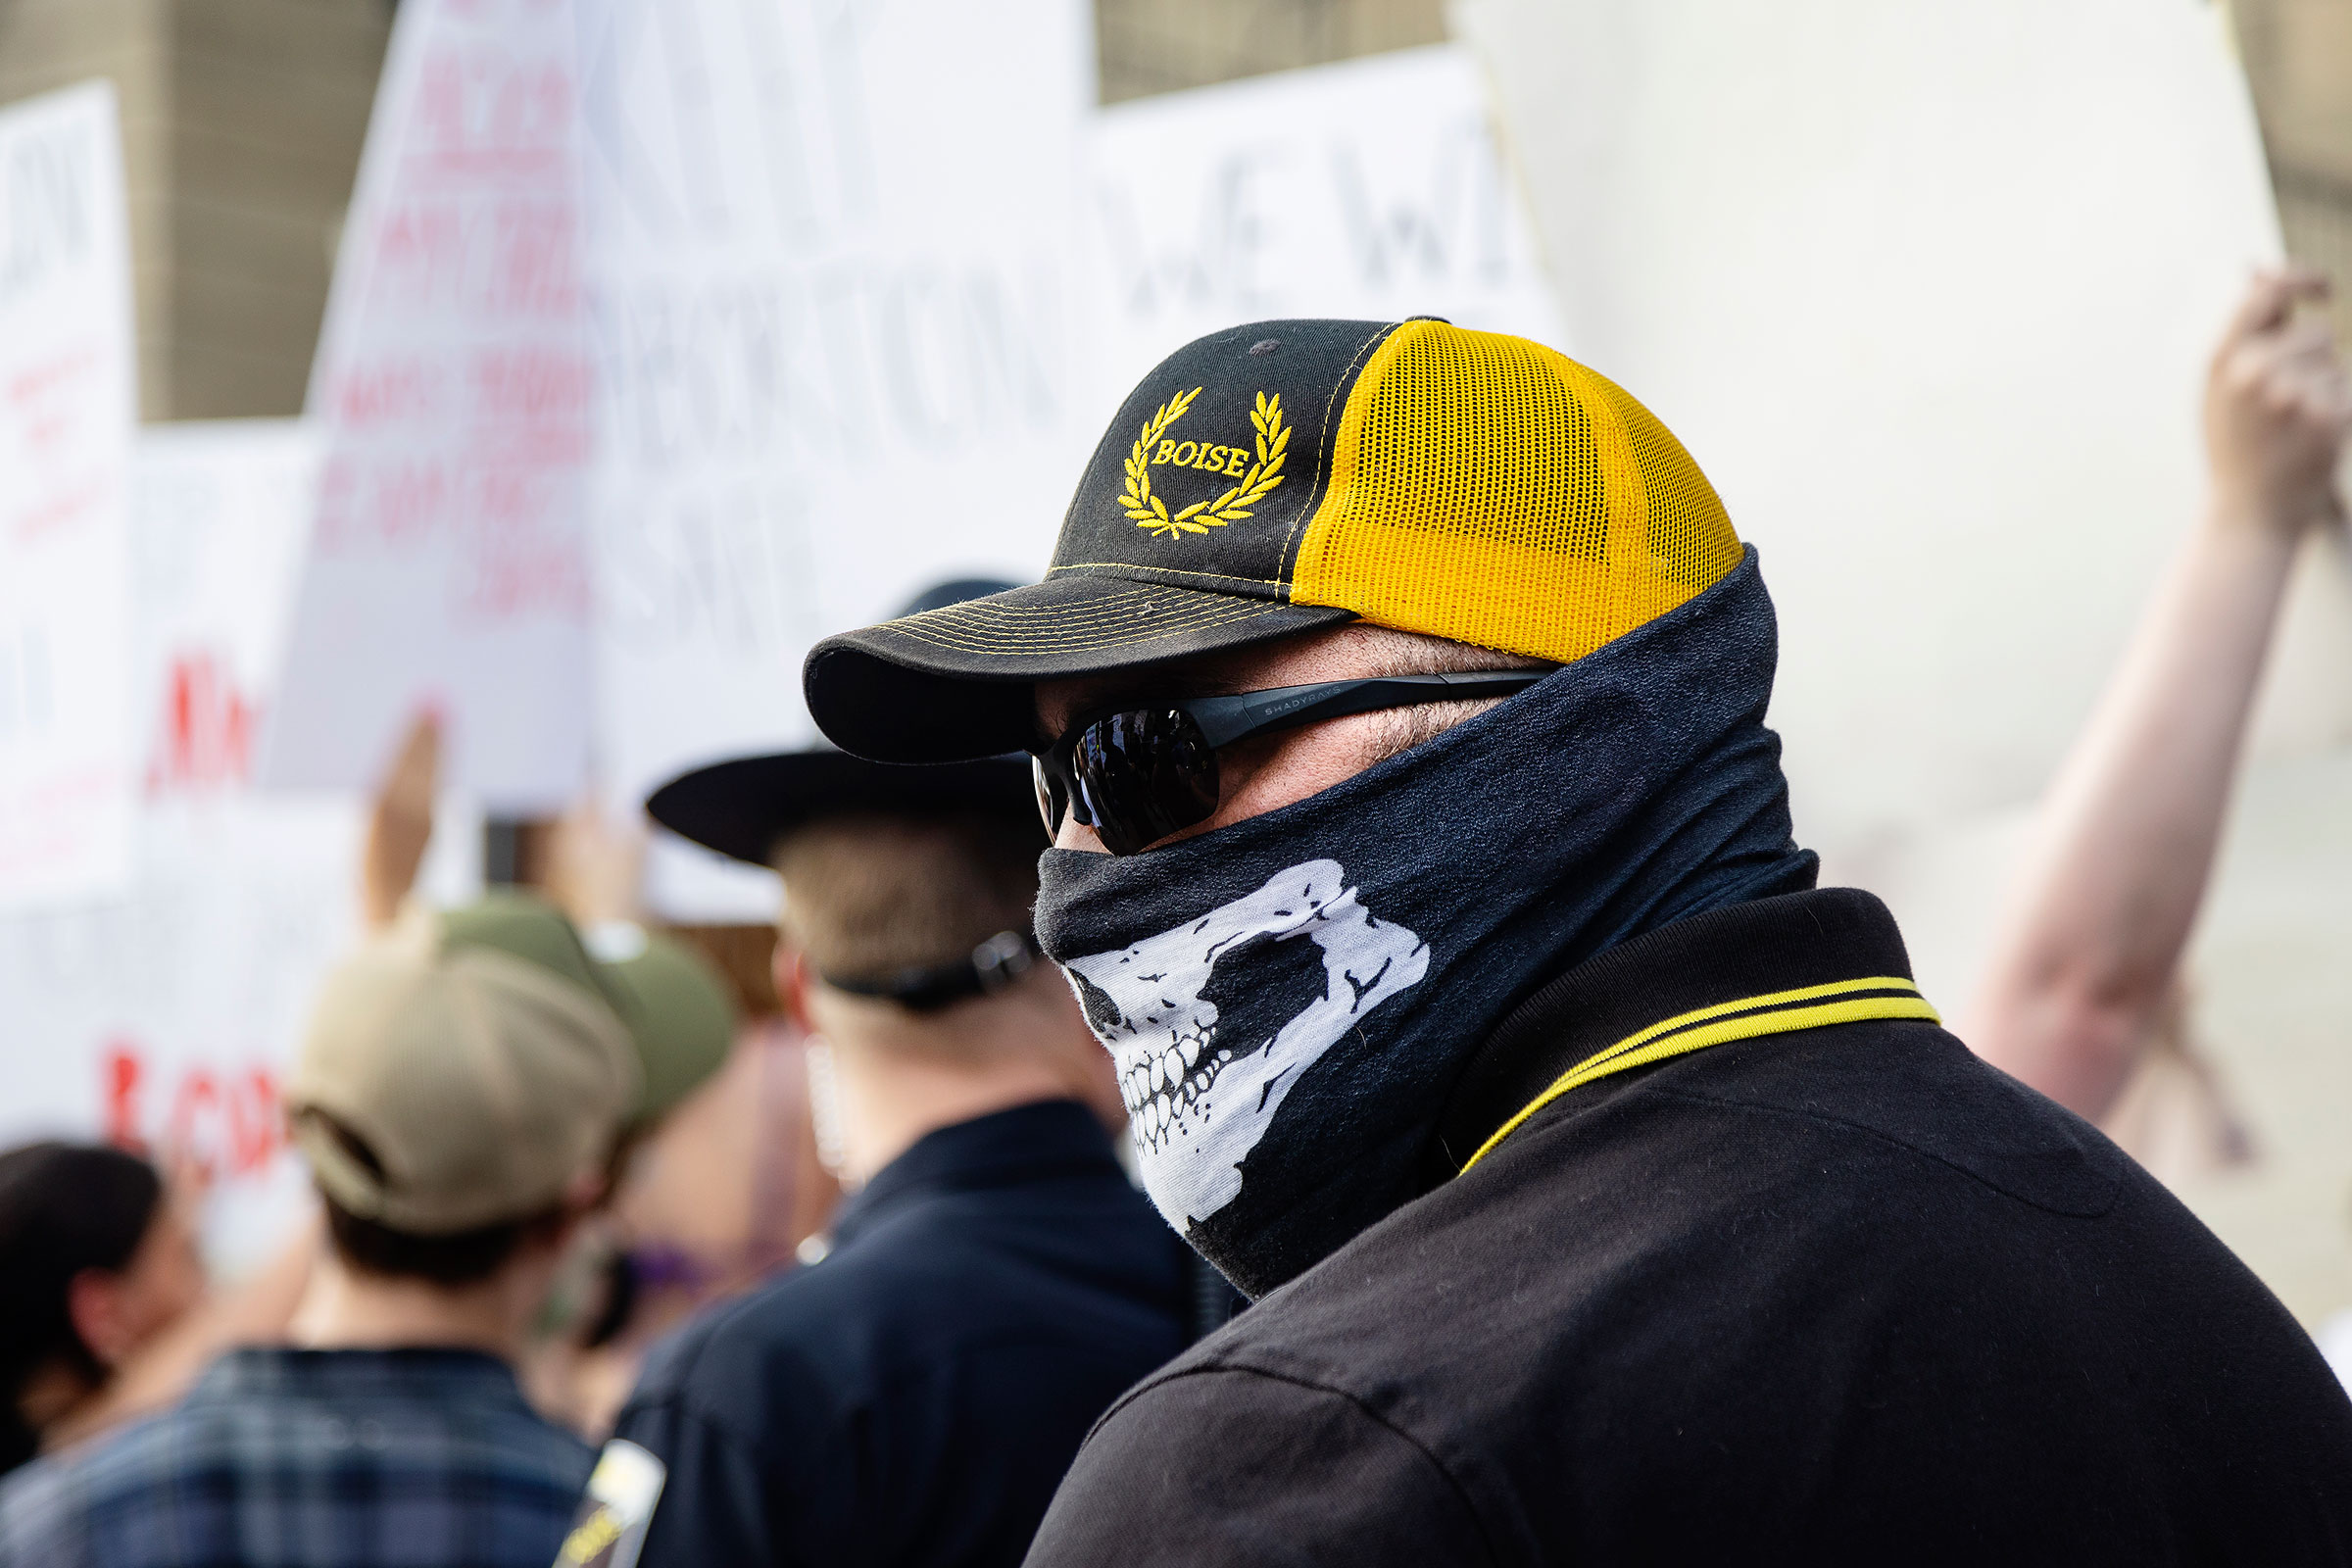 A member of the Proud Boys stands between a group of anti-abortion people attending a celebration and a group of protestors demanding the right to abortion outside of the Idaho Statehouse in Boise, Idaho on June 28, 2022. (Sarah A. Miller—Idaho Statesman/AP)